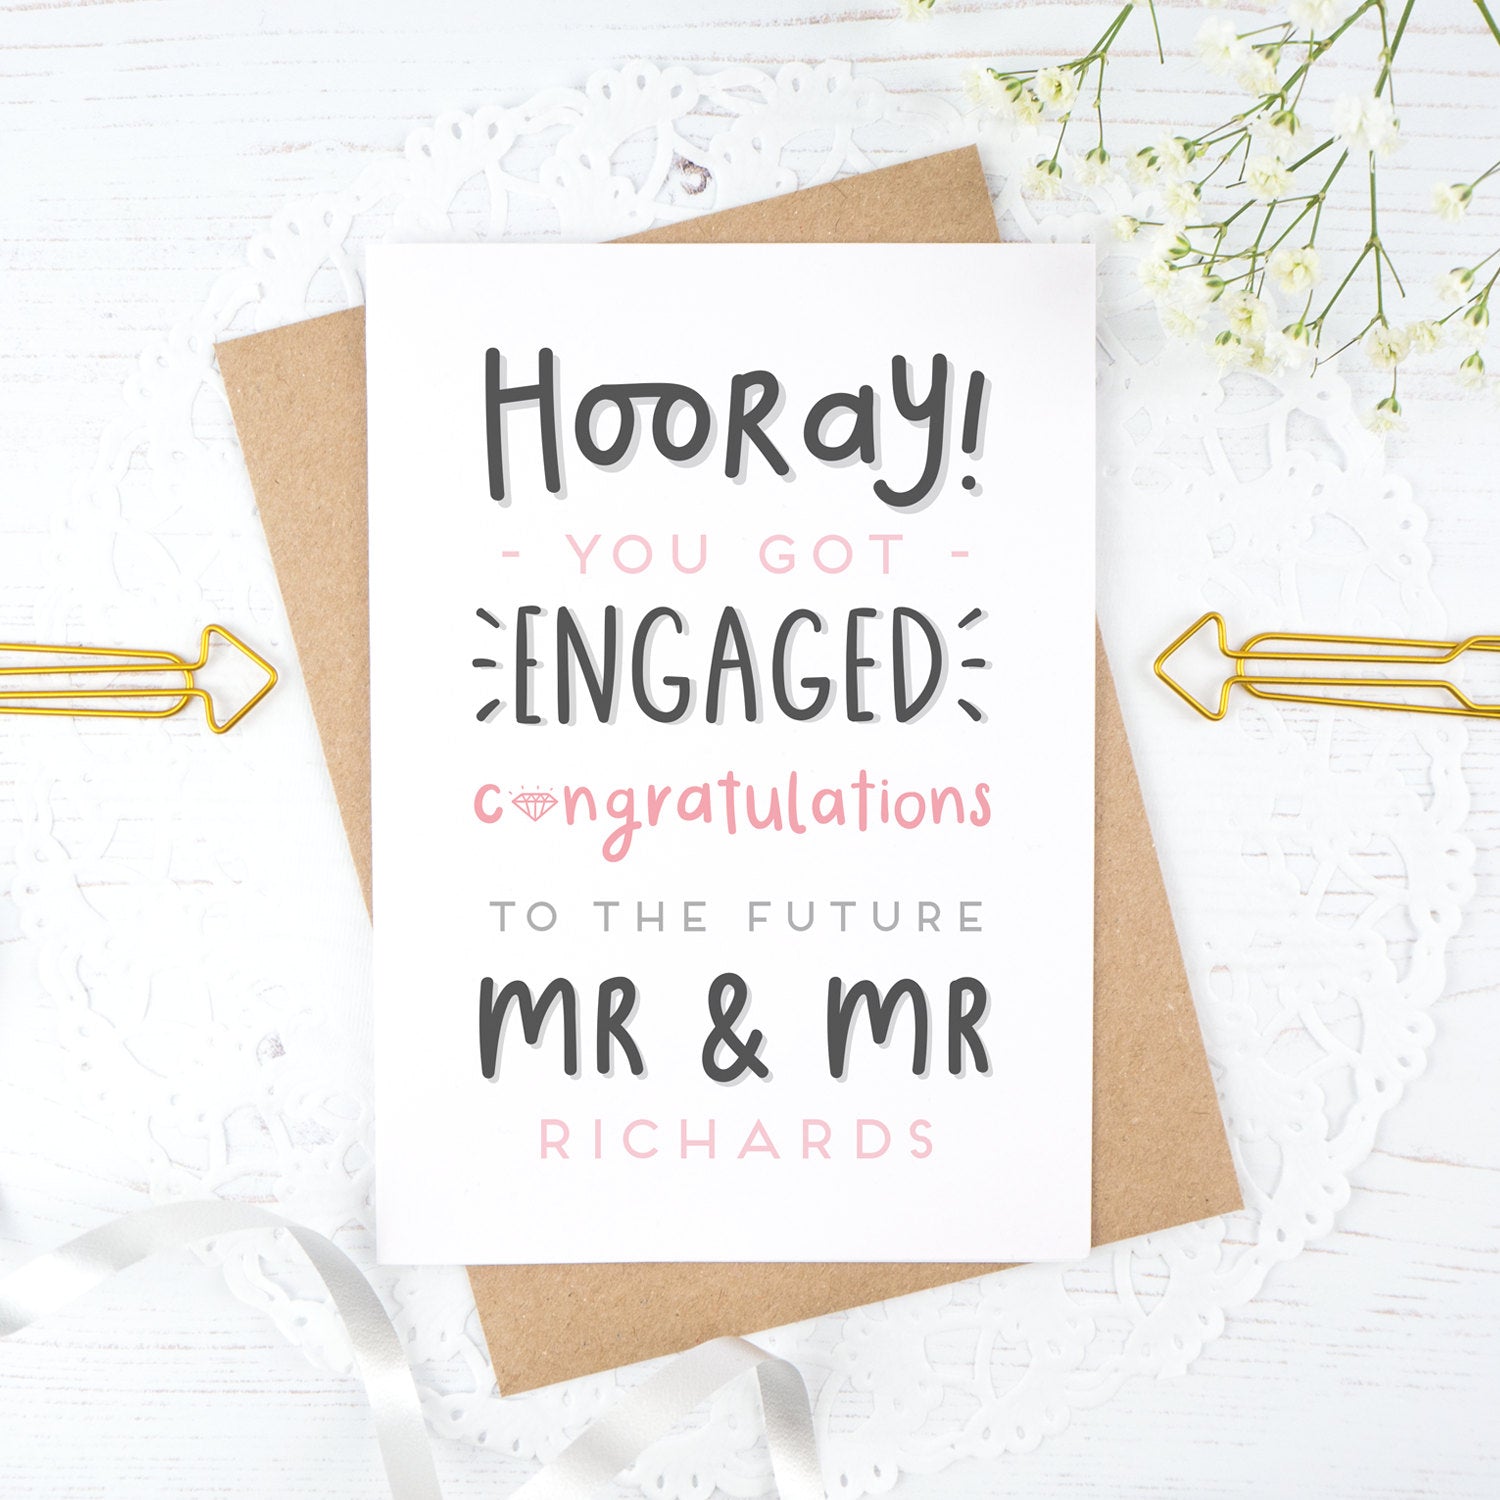 Hooray you got engaged! - Personalised Mr & Mr engagement card in pink